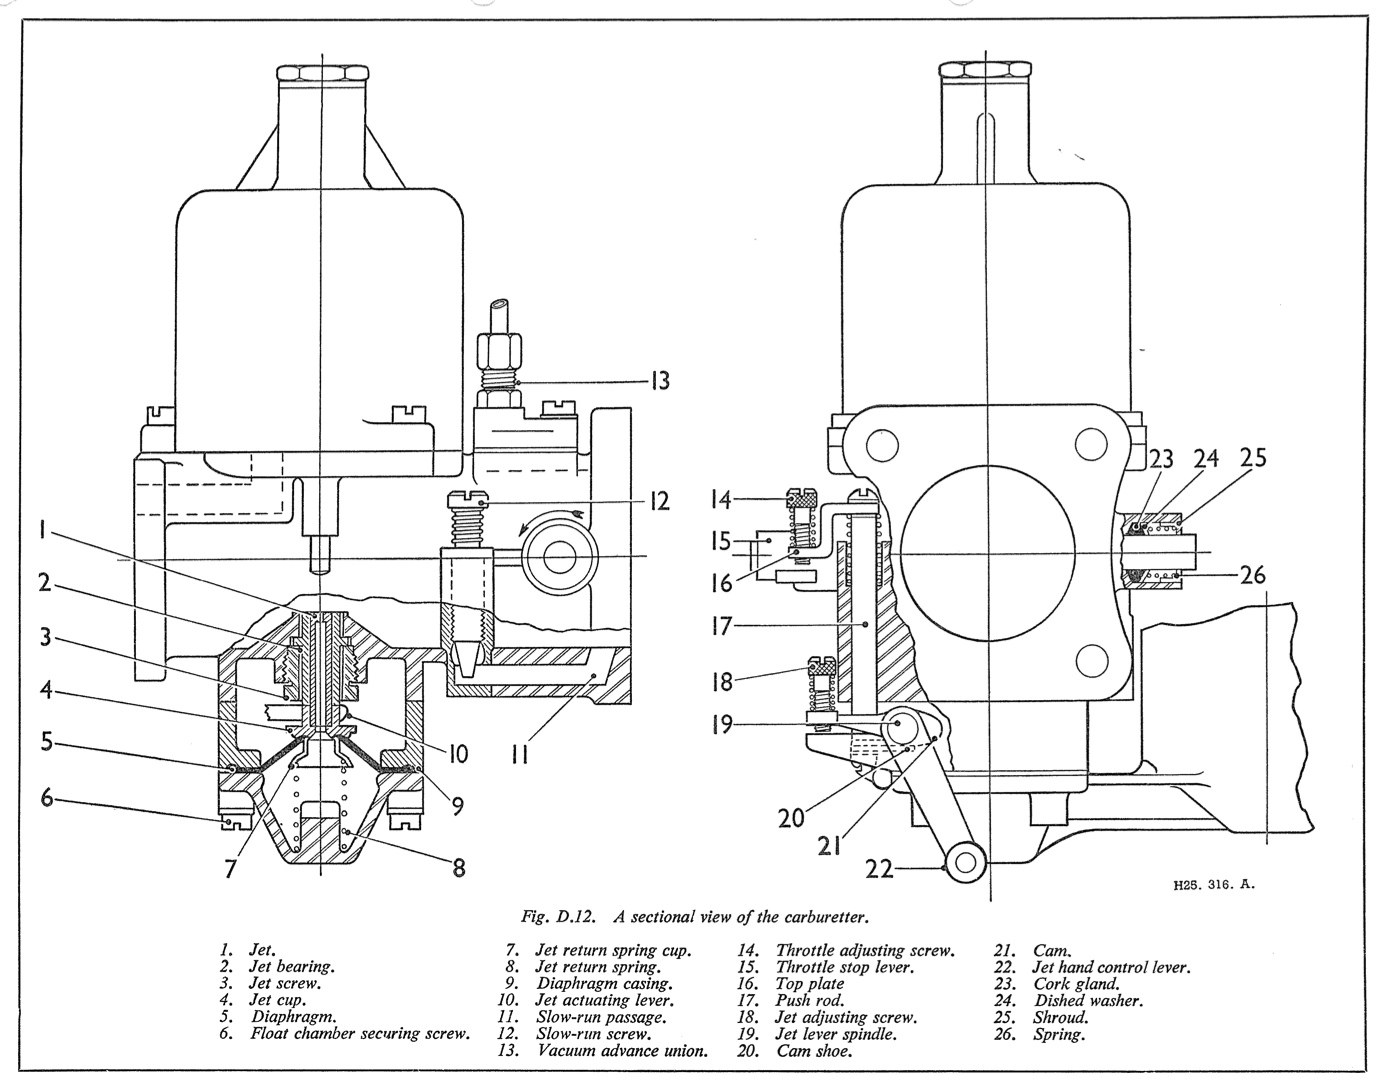 Fig. D.12. A sectional view of the carburetter.